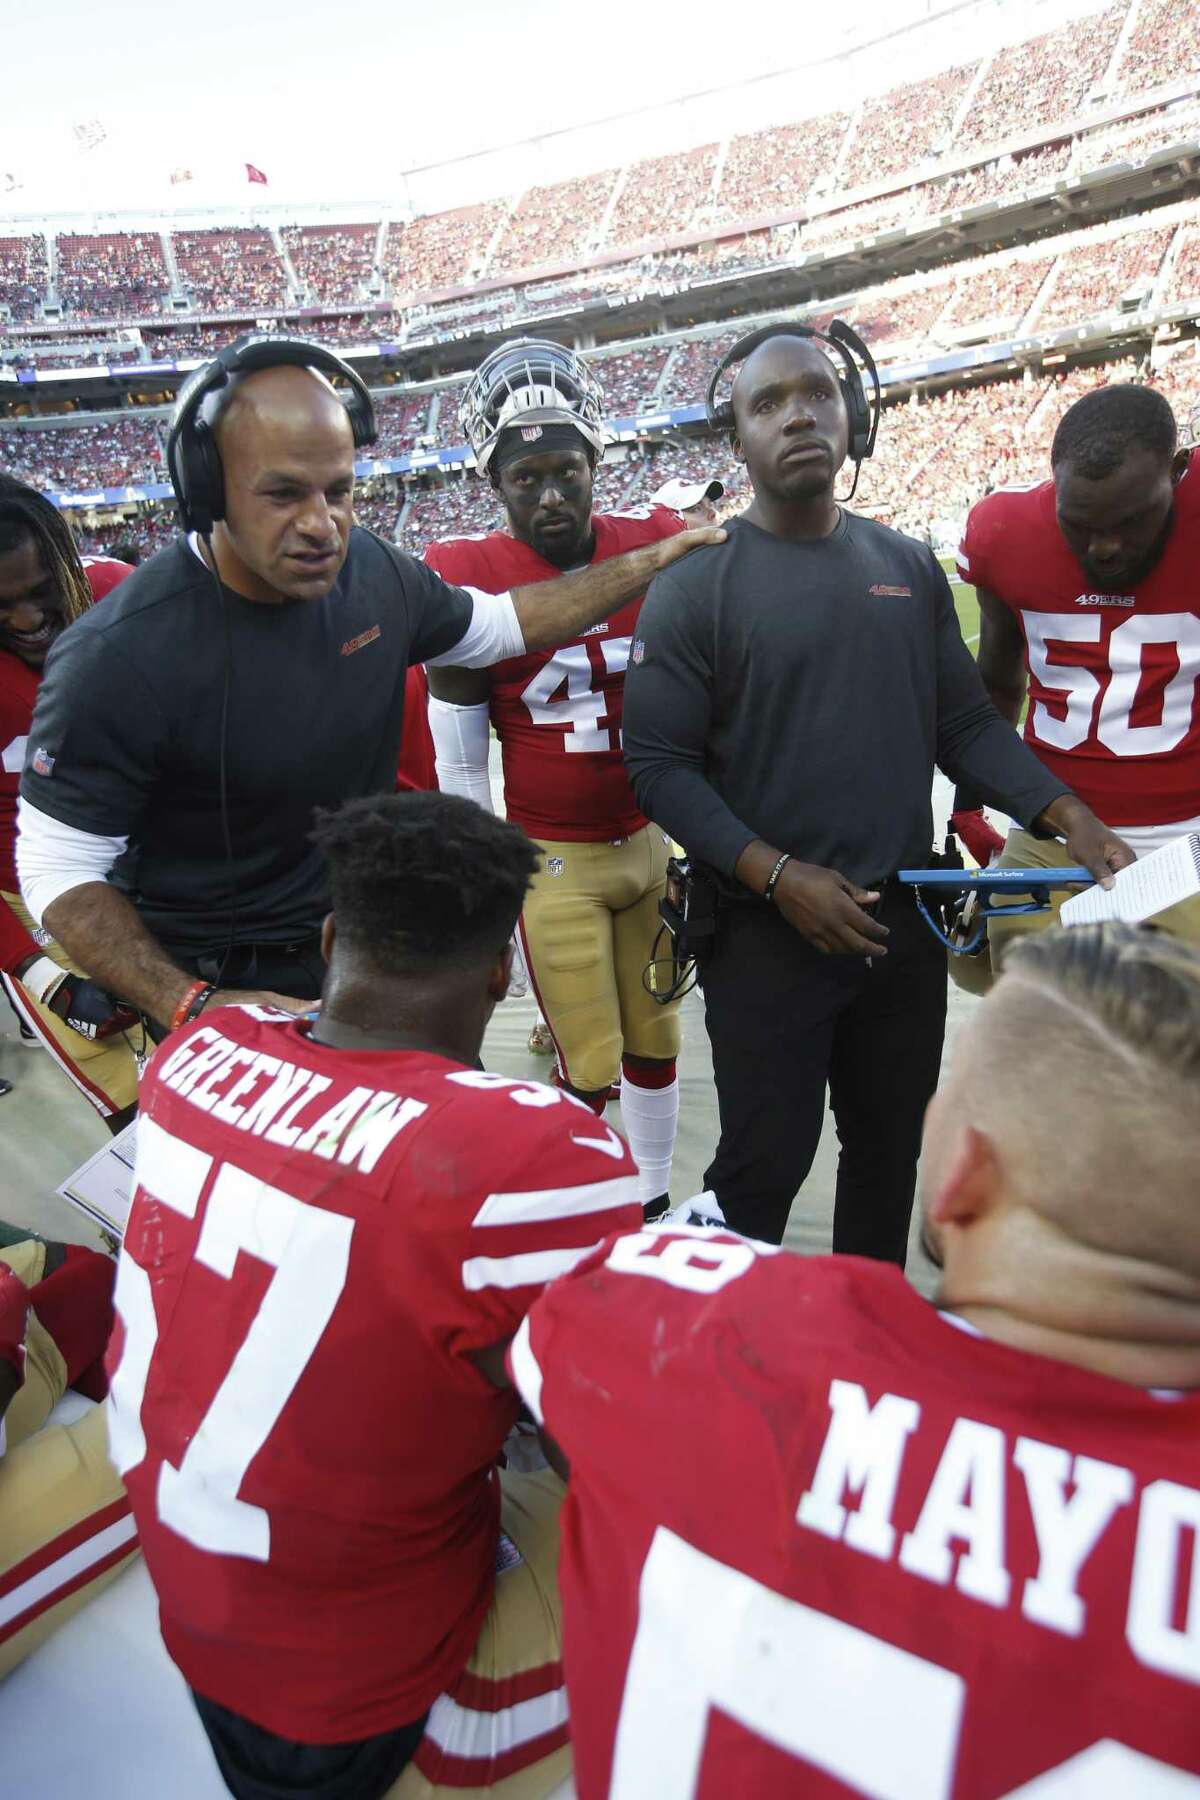 Defensive coordinator Robert Saleh and inside linebackers coach DeMeco Ryans of the San Francisco 49ers talk with the linebackers on the sideline during a preseason game.